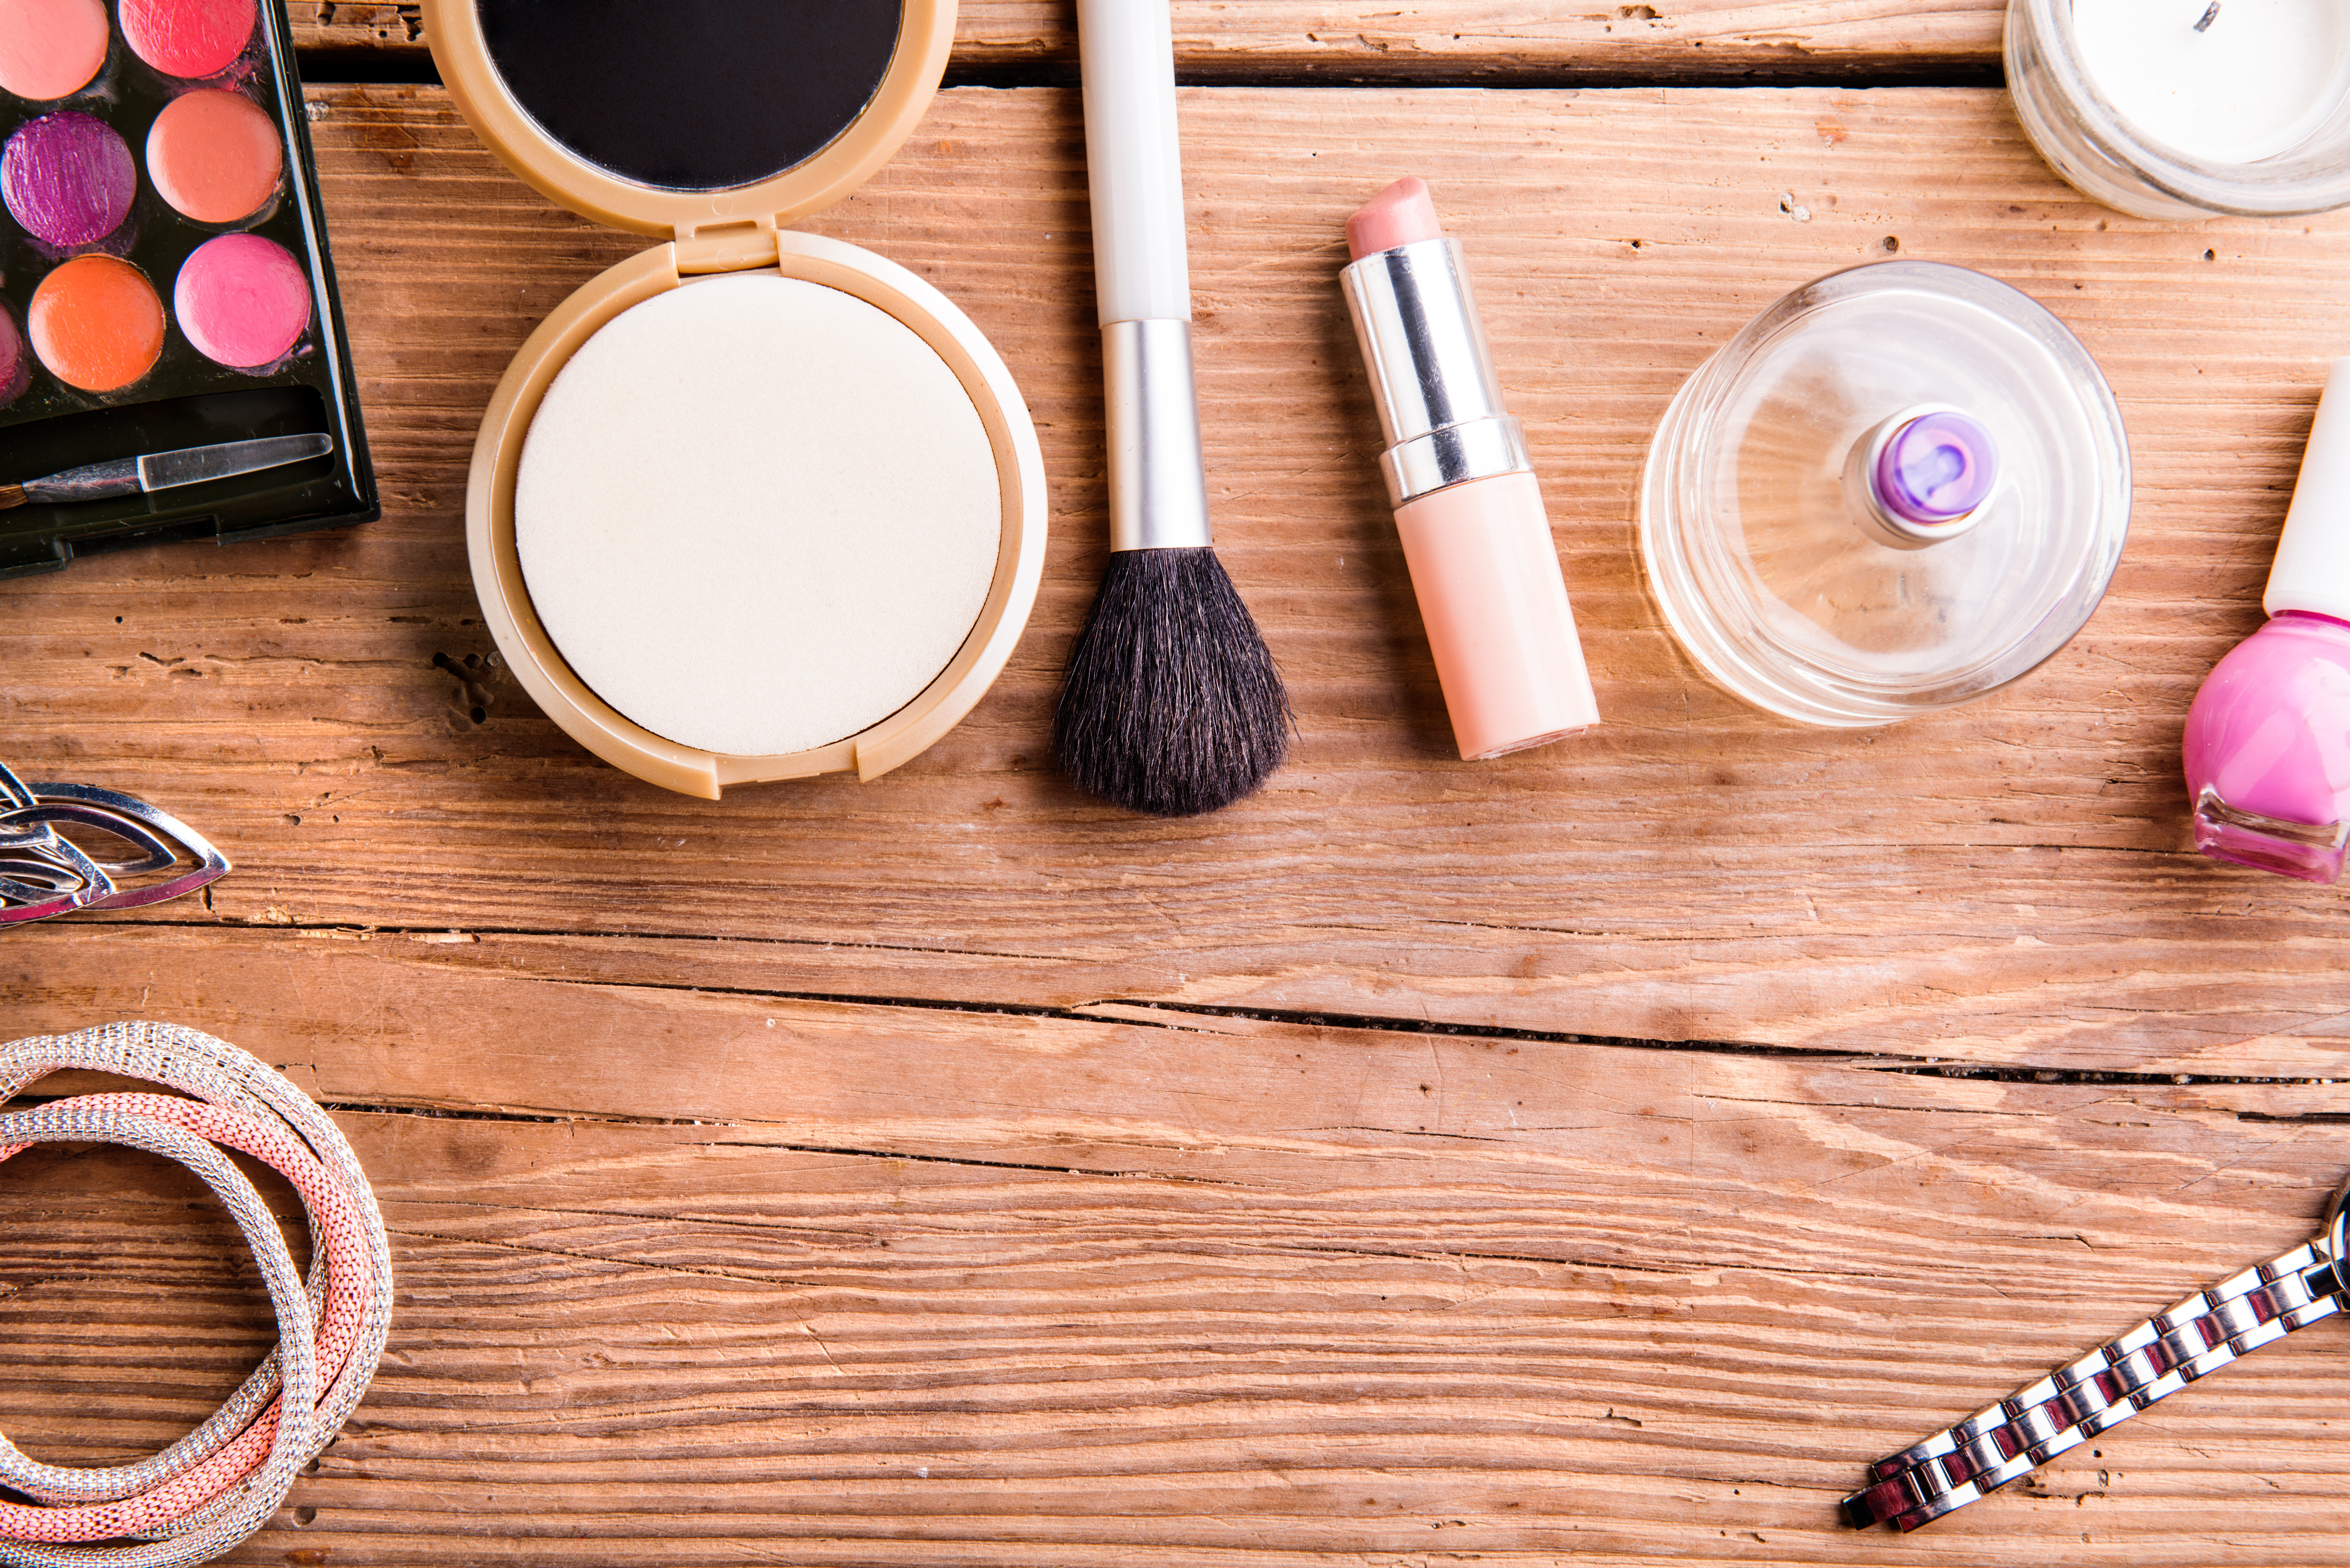 Various make up products, including lipstick, nail polish, and makeup brushes, laid flat on a wooden tabletop.